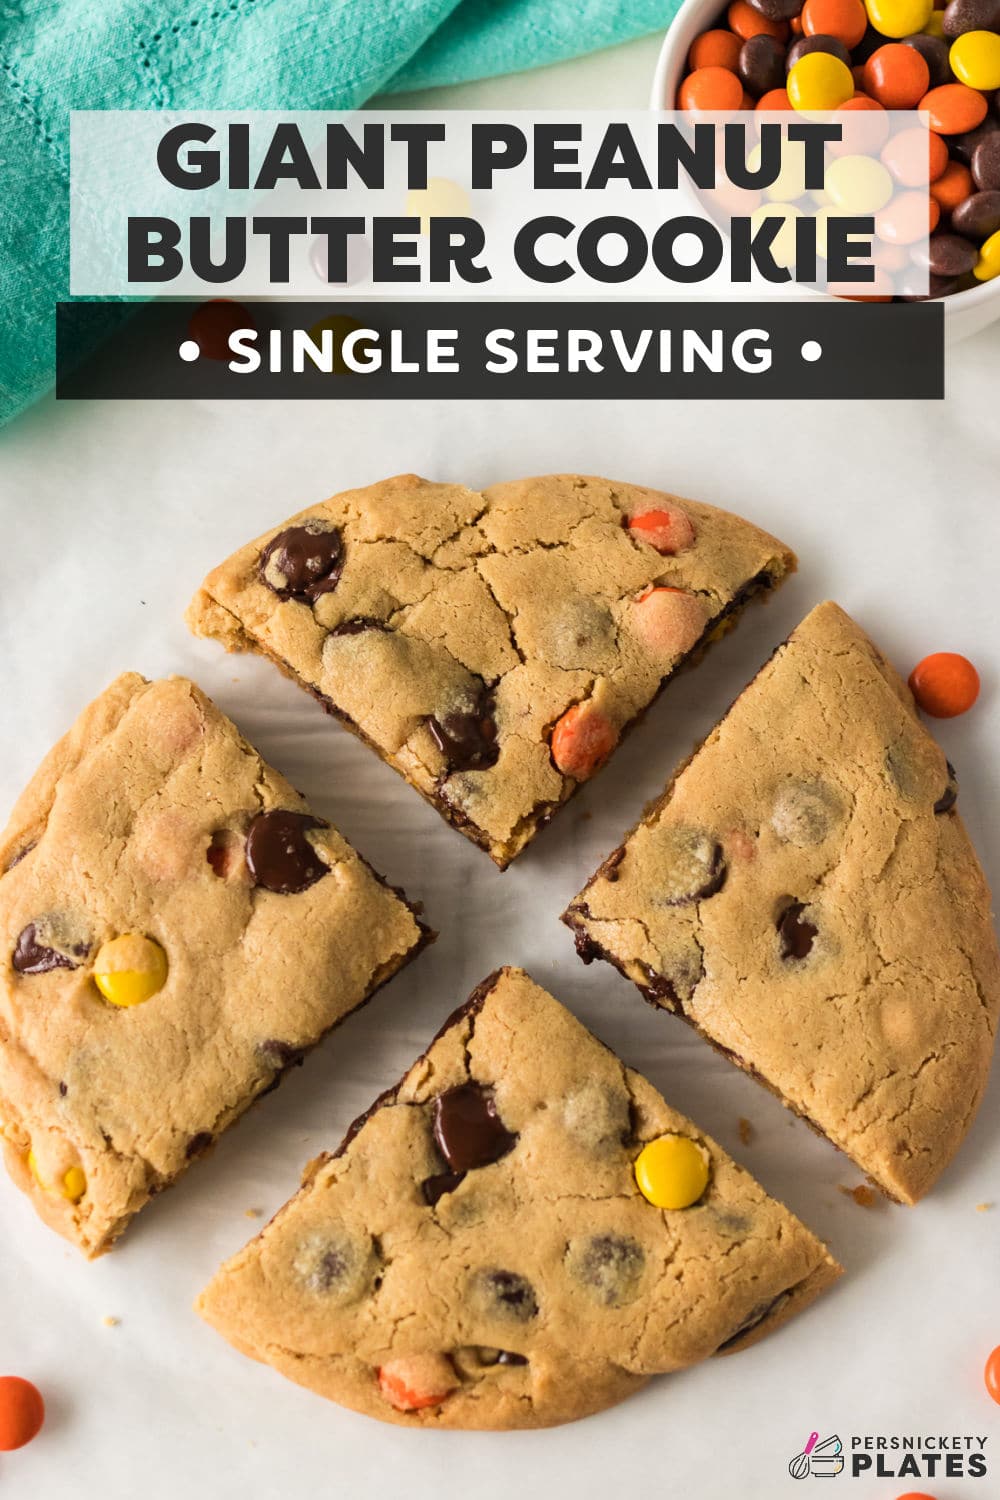 This Giant Peanut Butter Cookie is loaded with chocolate chips and Reese’s pieces in every bite and ready in 30 minutes. It’s soft in the center, chewy around the edges, and perfect for one person or two if you feel like sharing. | www.persnicketyplates.com